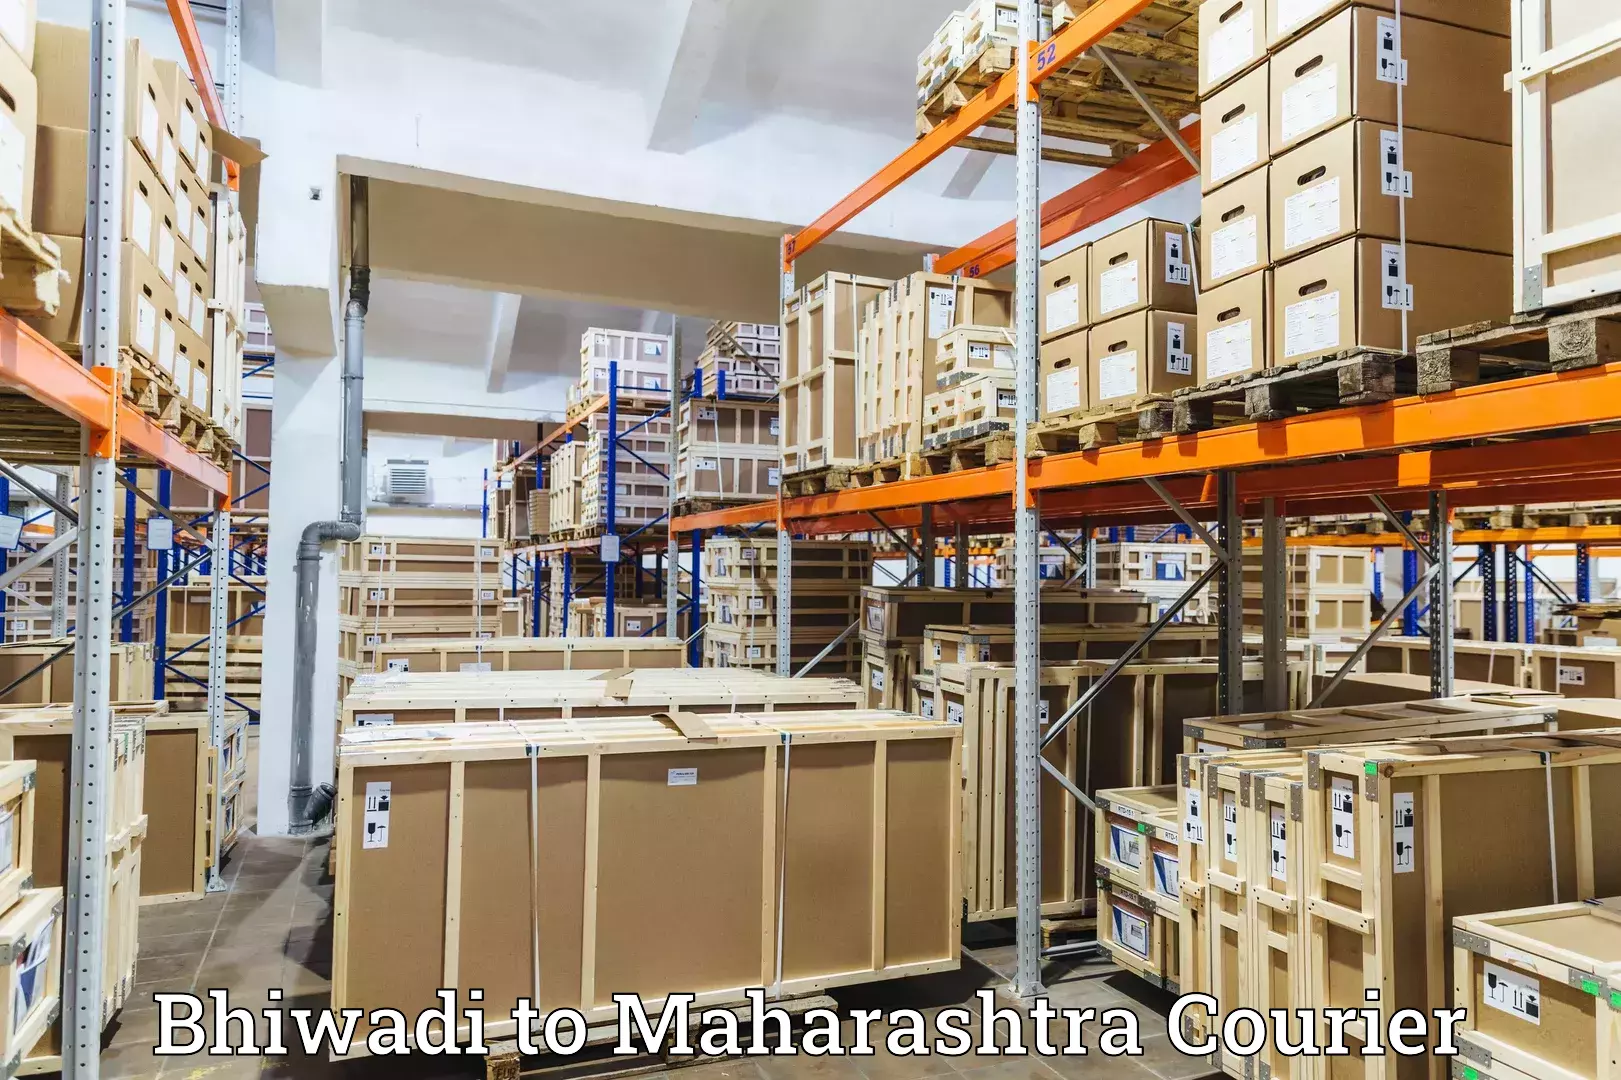 Nationwide parcel services Bhiwadi to Beed